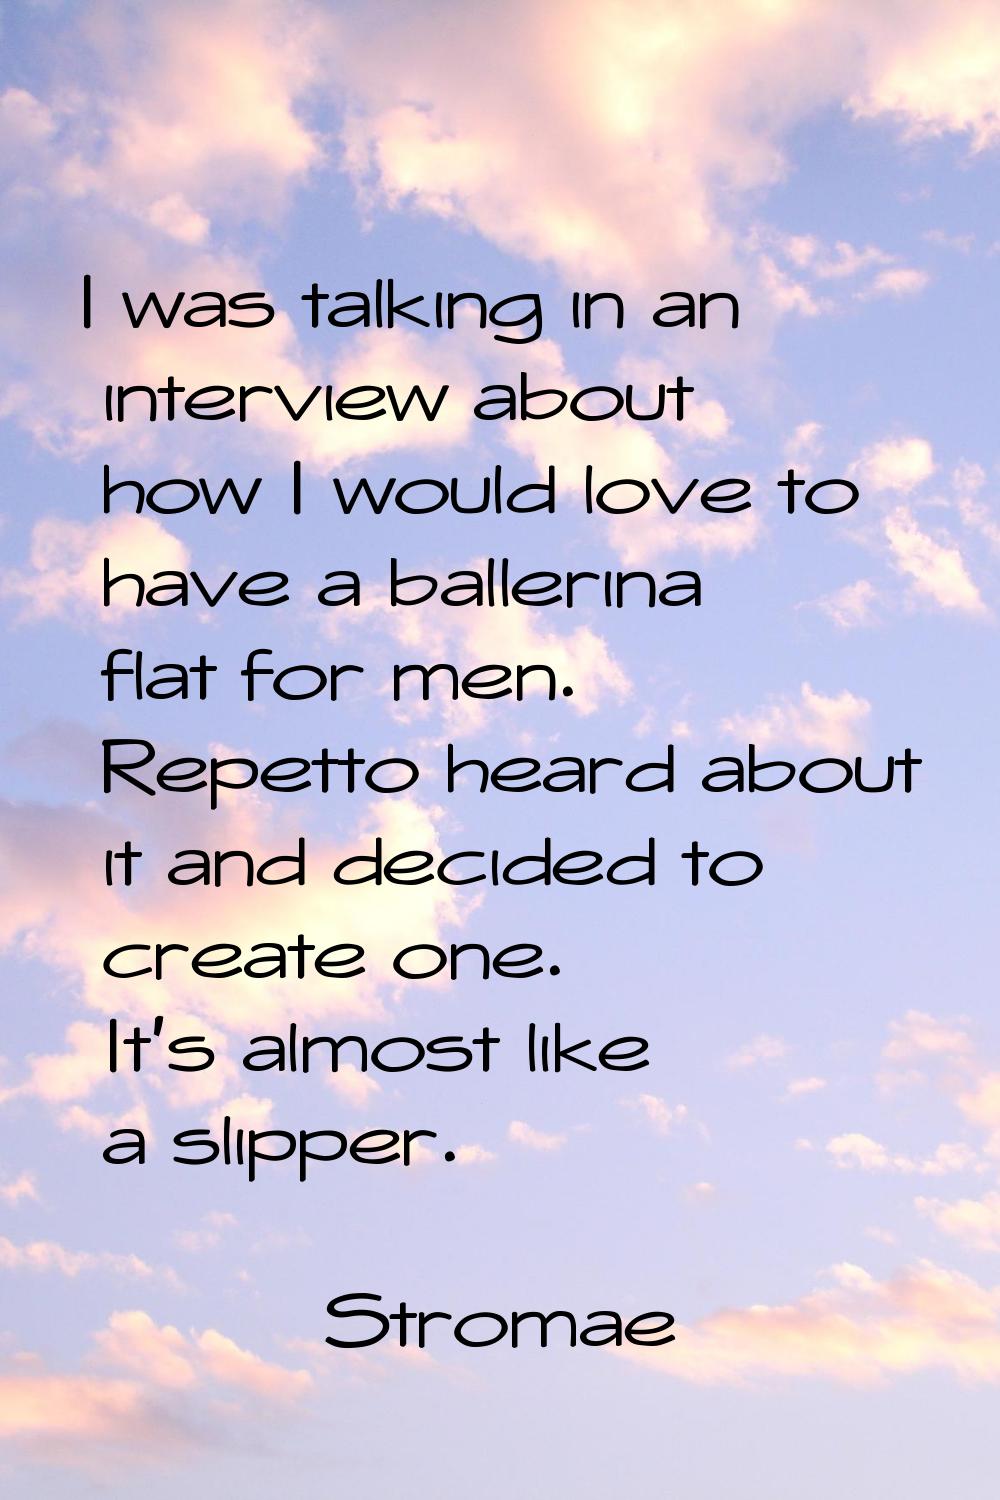 I was talking in an interview about how I would love to have a ballerina flat for men. Repetto hear